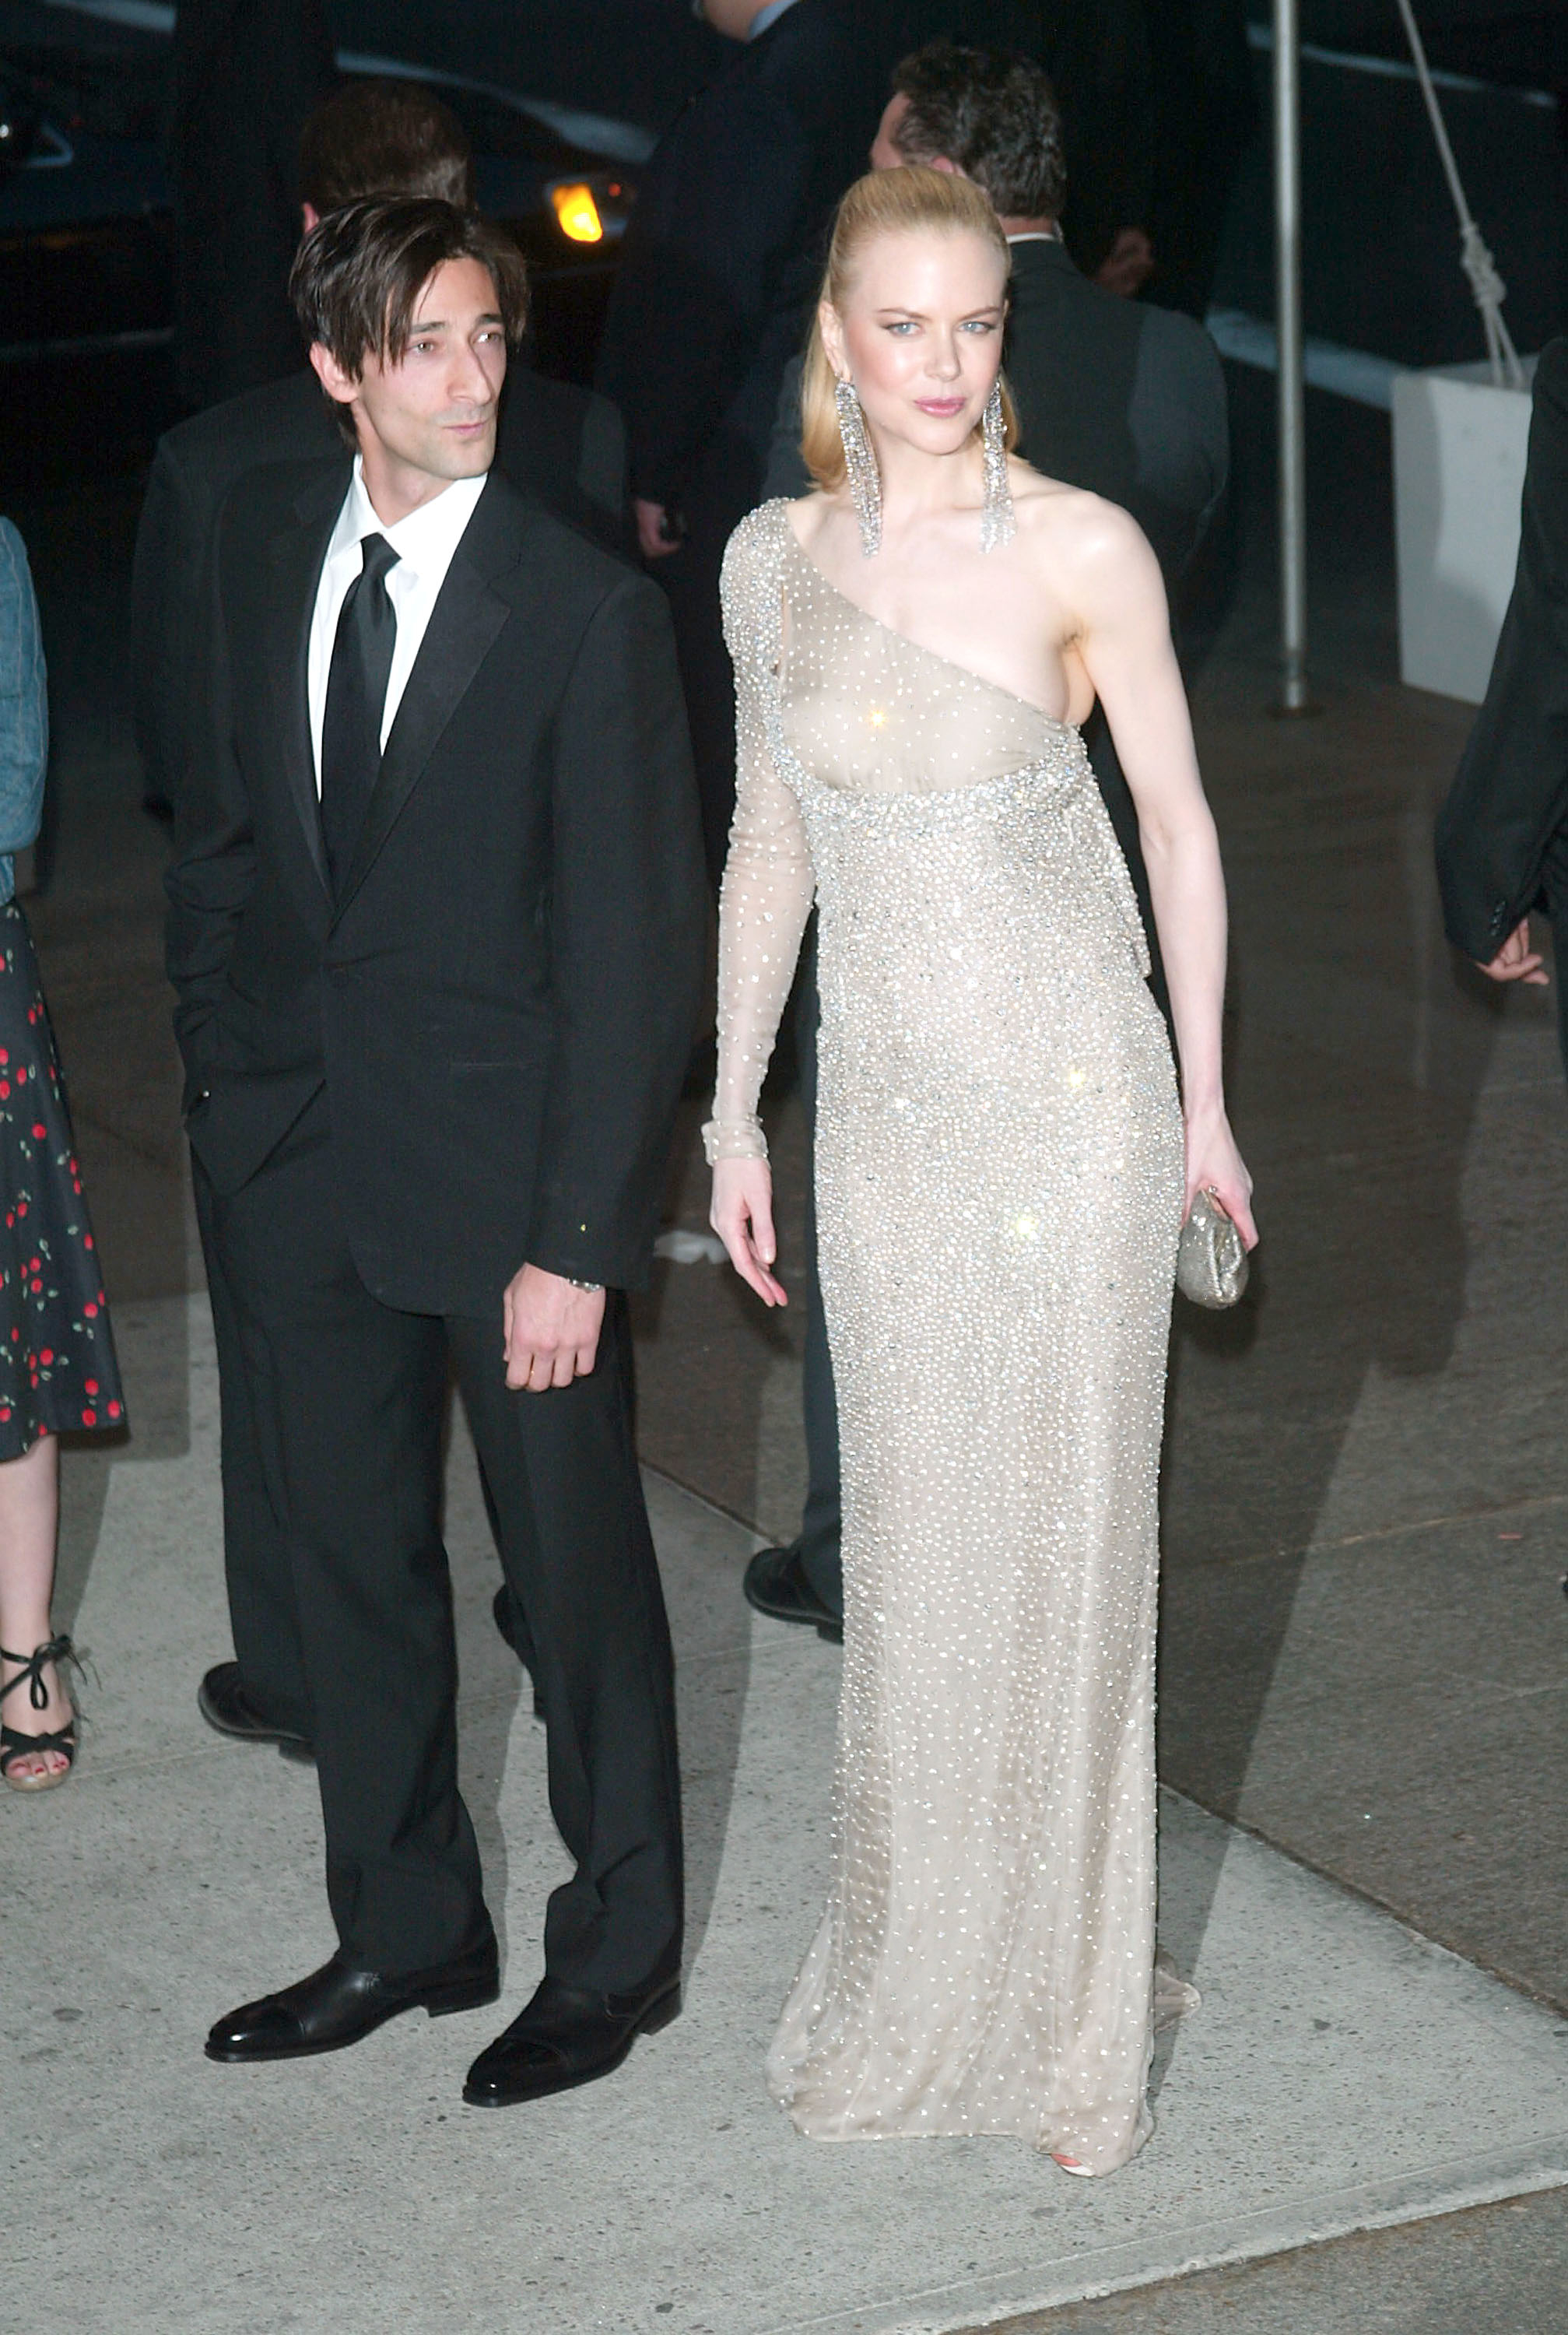 Two celebrities on the red carpet; the woman is in a beaded gown with a sheer overlay, the man in a classic black suit